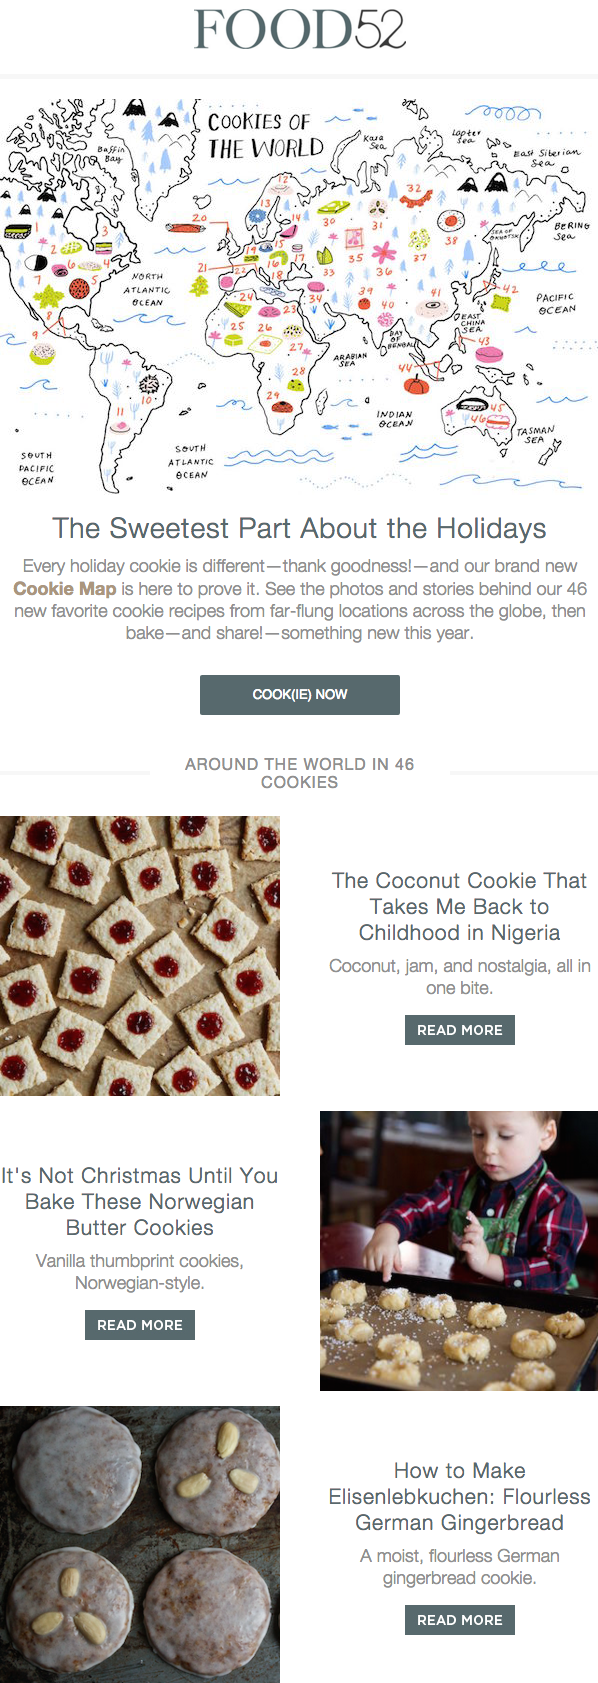 food52-holiday-campaign-1.png